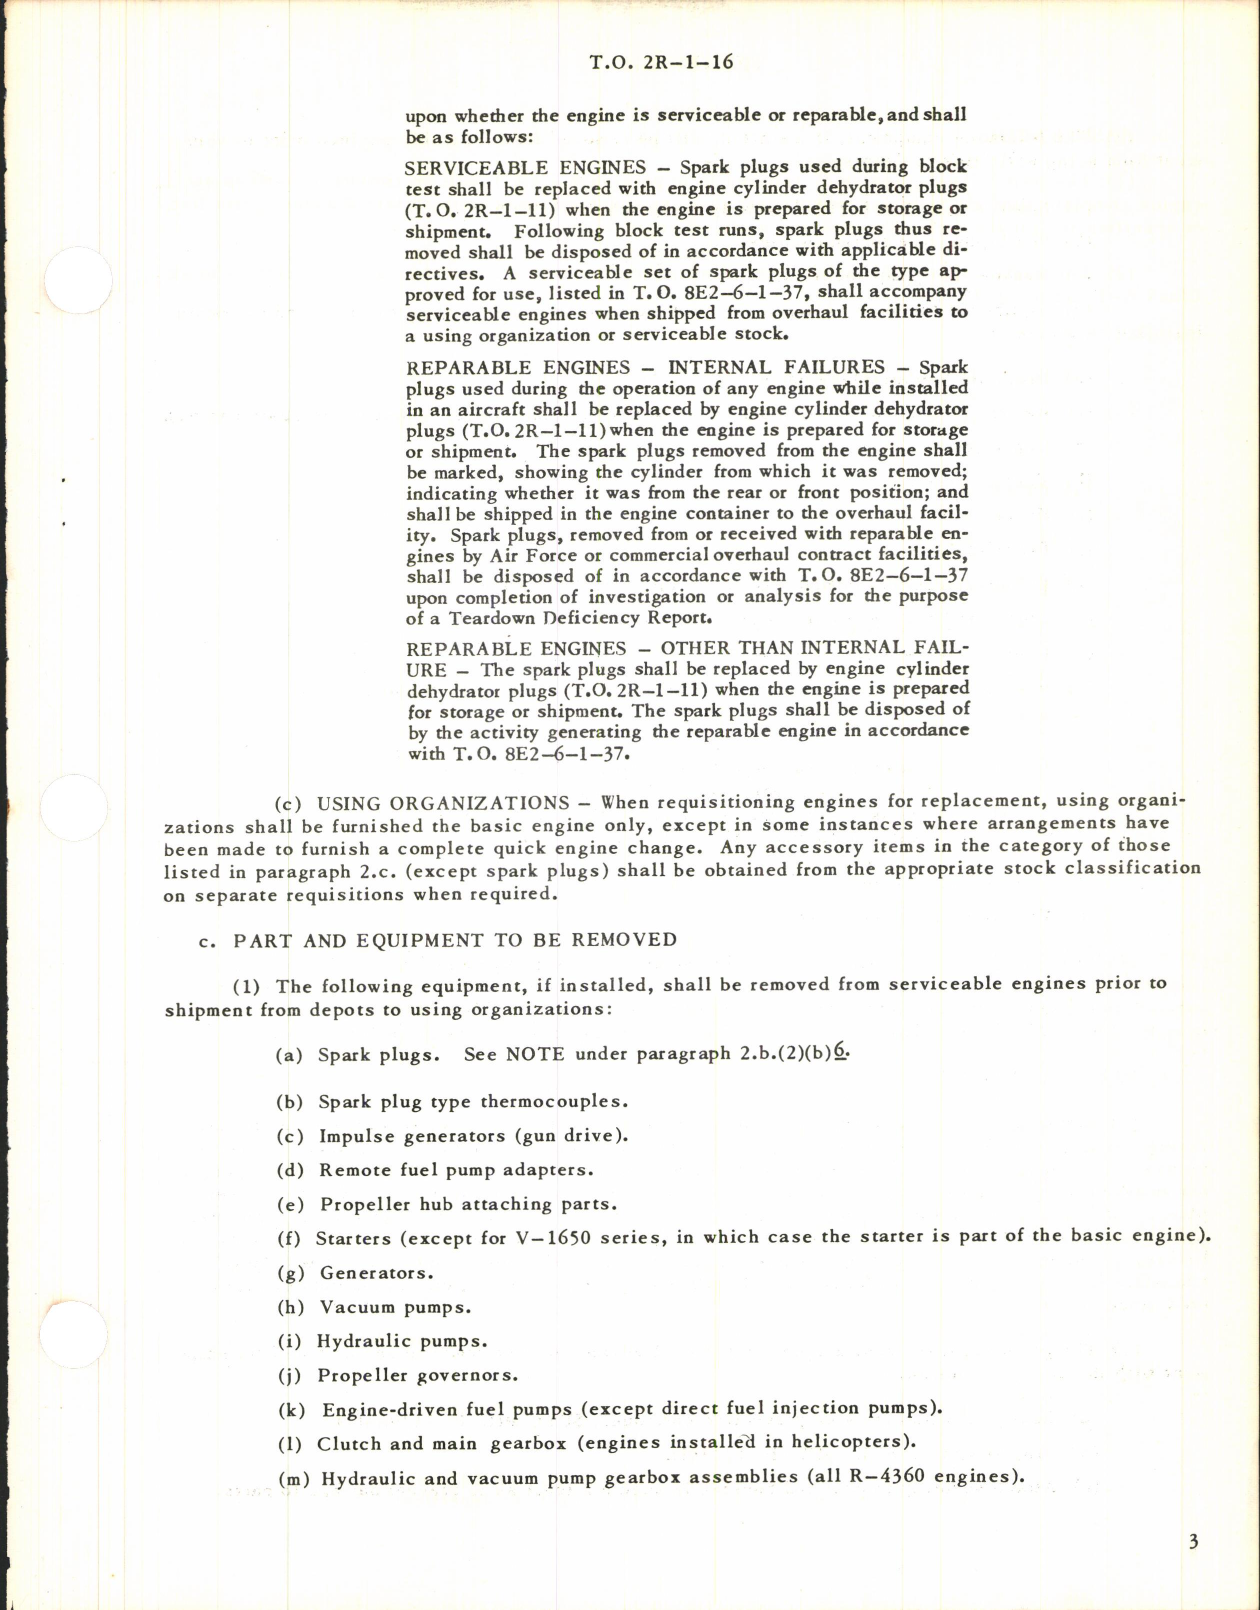 Sample page 3 from AirCorps Library document: Equipment Comprising Complete Reciprocating Type Aircraft Engines